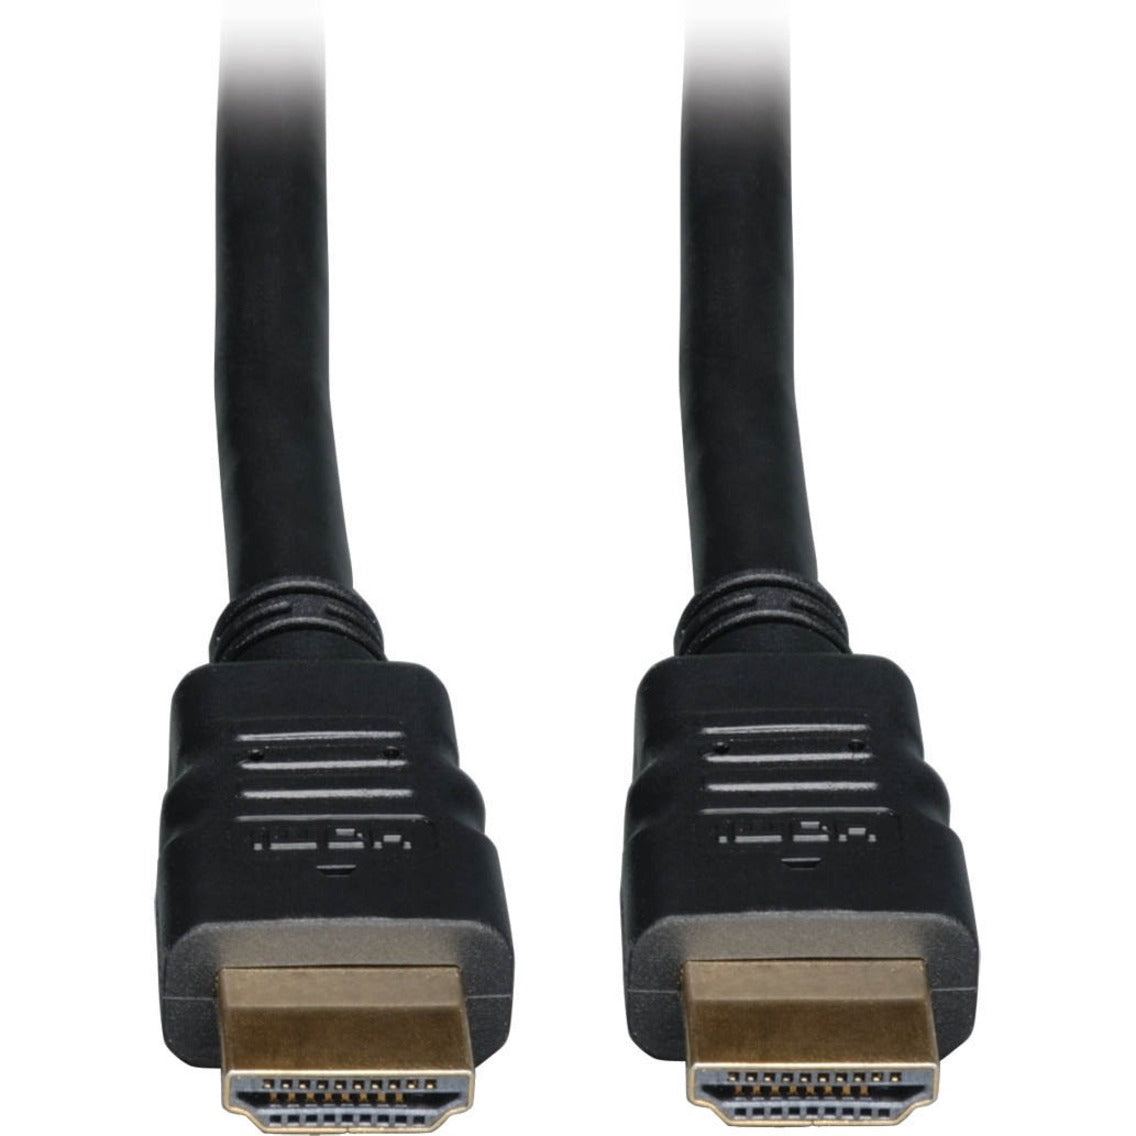 Tripp Lite P569-010-CL2 HDMI Audio/Video Cable with Ethernet, 10 ft, Molded, 18 Gbit/s, 4096 x 2160, Gold Plated